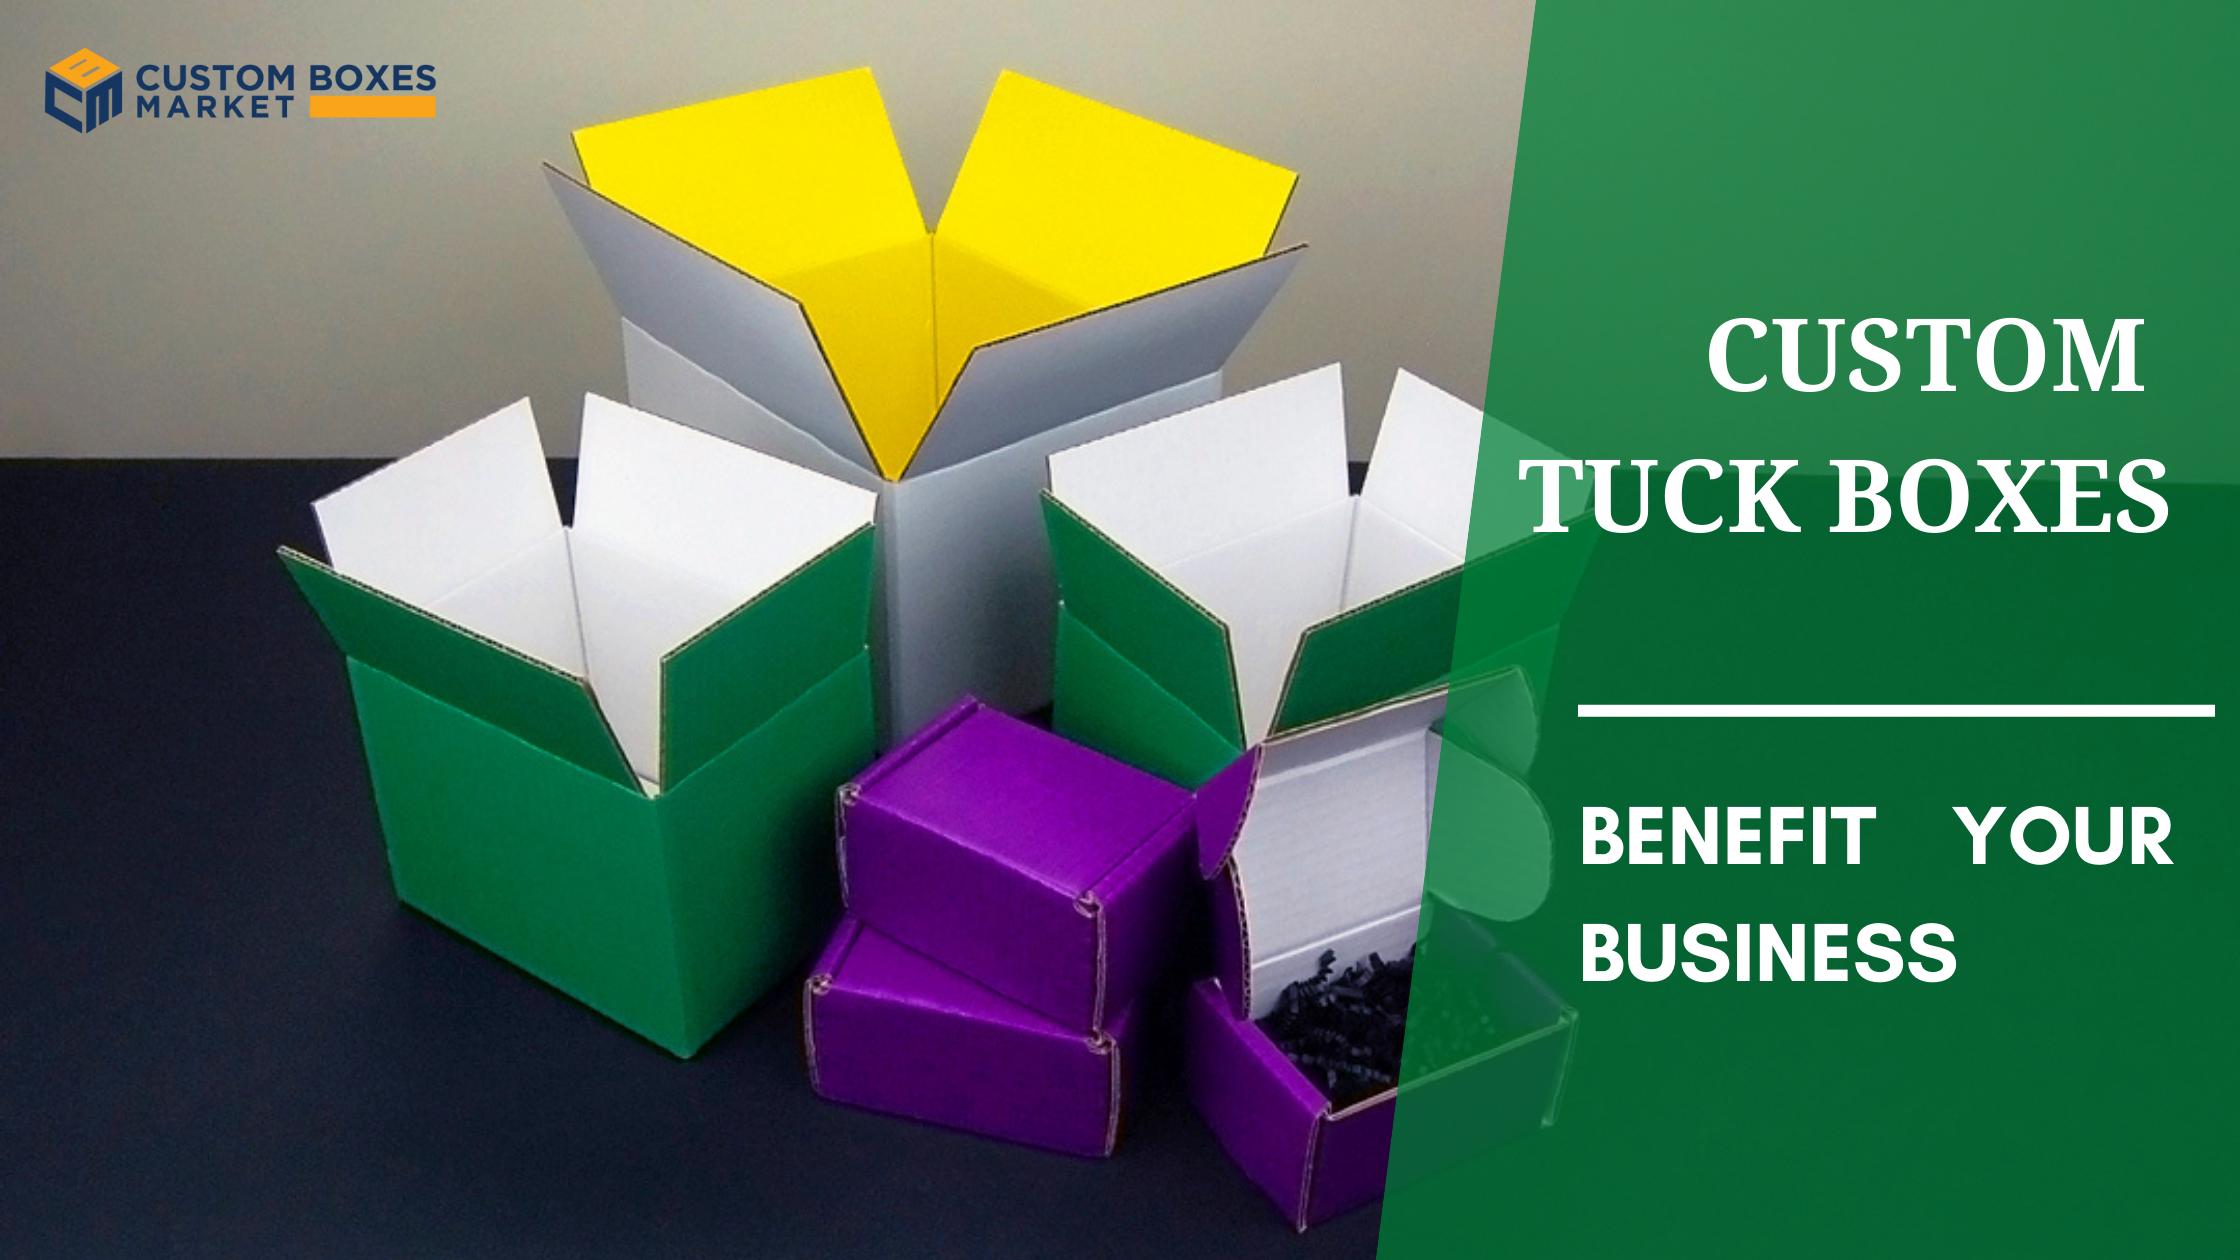 10 Evidences That Custom Tuck Boxes Benefit Your Business